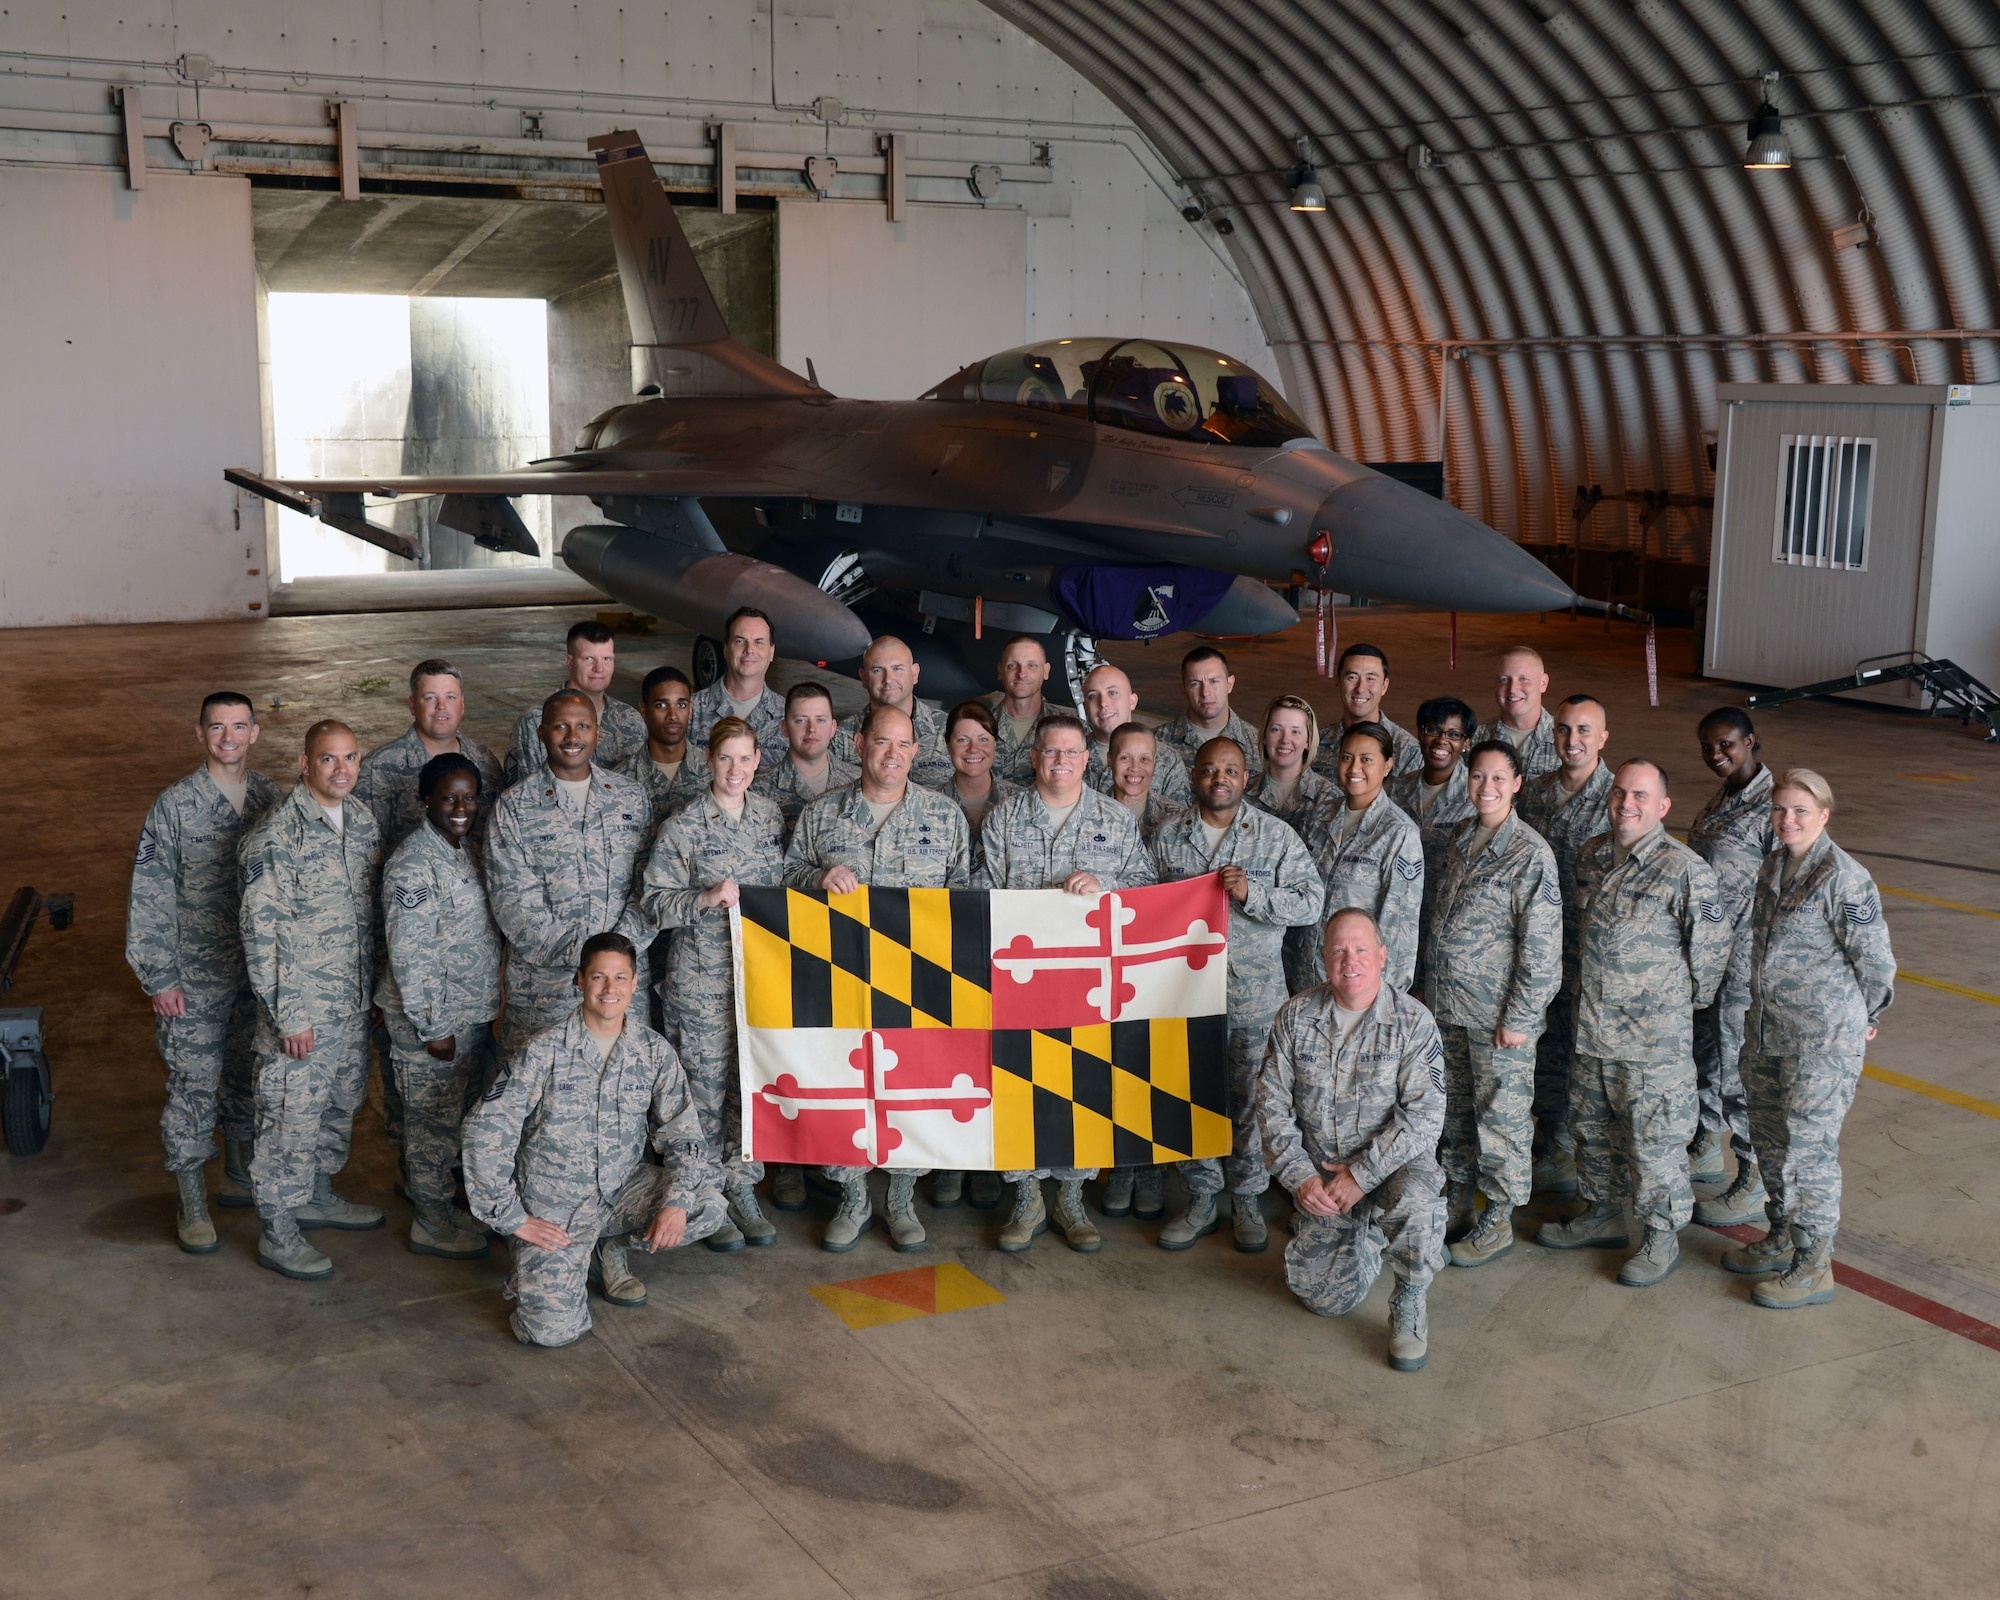 Members of the 175th Logistics Readiness Squadron pose in front of an F-16 Fighting Falcon during their annual training at Aviano Air Base, Italy, May 30, 2014. Nearly 50 members of the Maryland Air National Guard deployed to Italy to train with their active duty counterparts. (National Guard photo by 2nd Lt. Benjamin Hughes/Released)